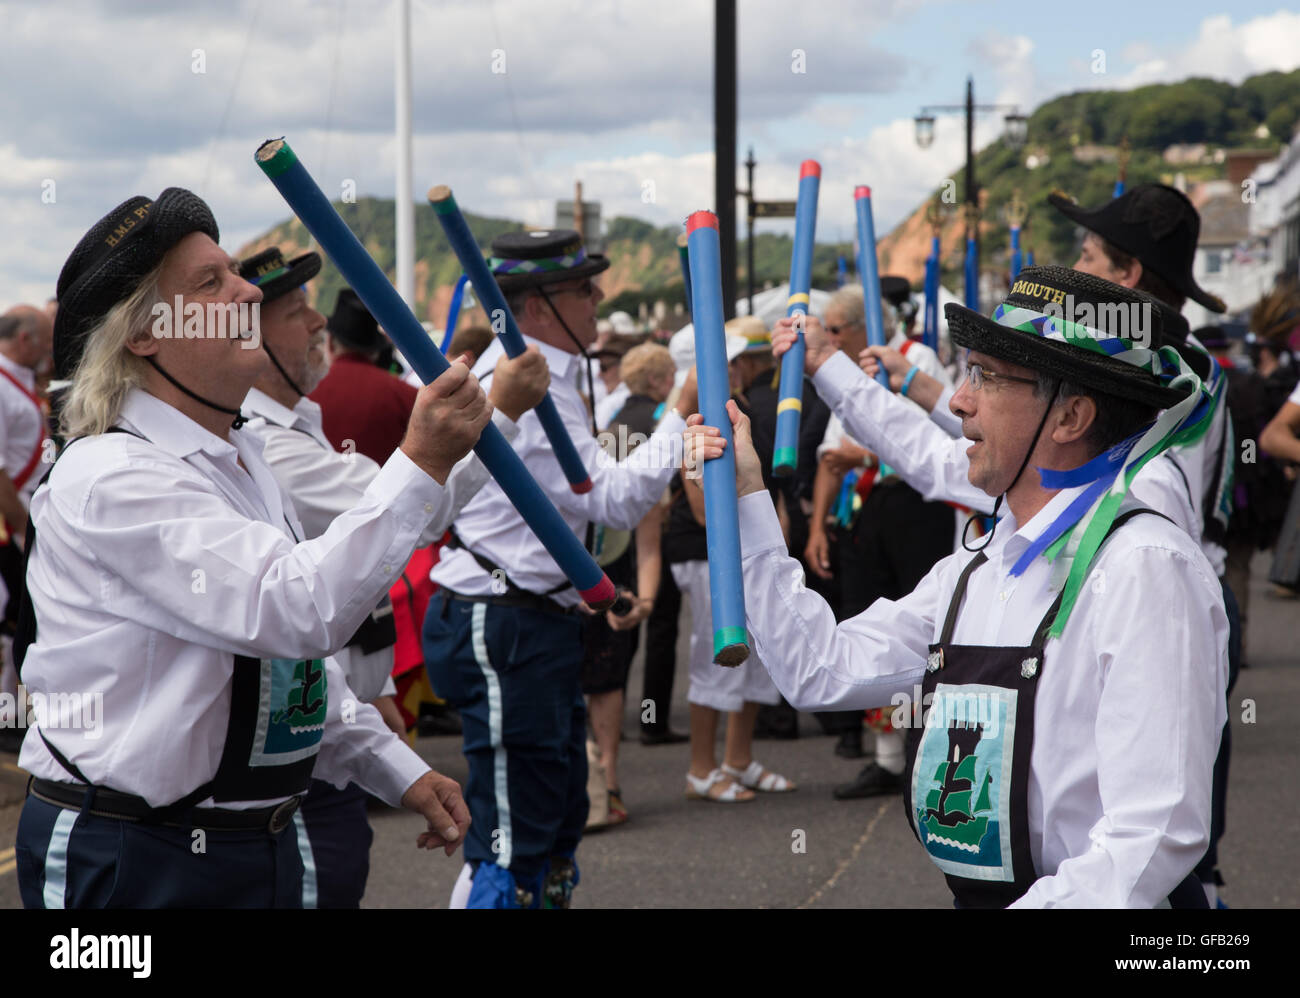 Sidmouth, Devon, UK. 31st July, 2016. Folk Dancing - Sidmouth Folk Week, Devon 31st July 16 Folk dancing all along the Esplanade is a feature of Sidmouth Festival, which has been running in the South West regency town since 1955. © Tony Charnock/Alamy LiveNews Stock Photo